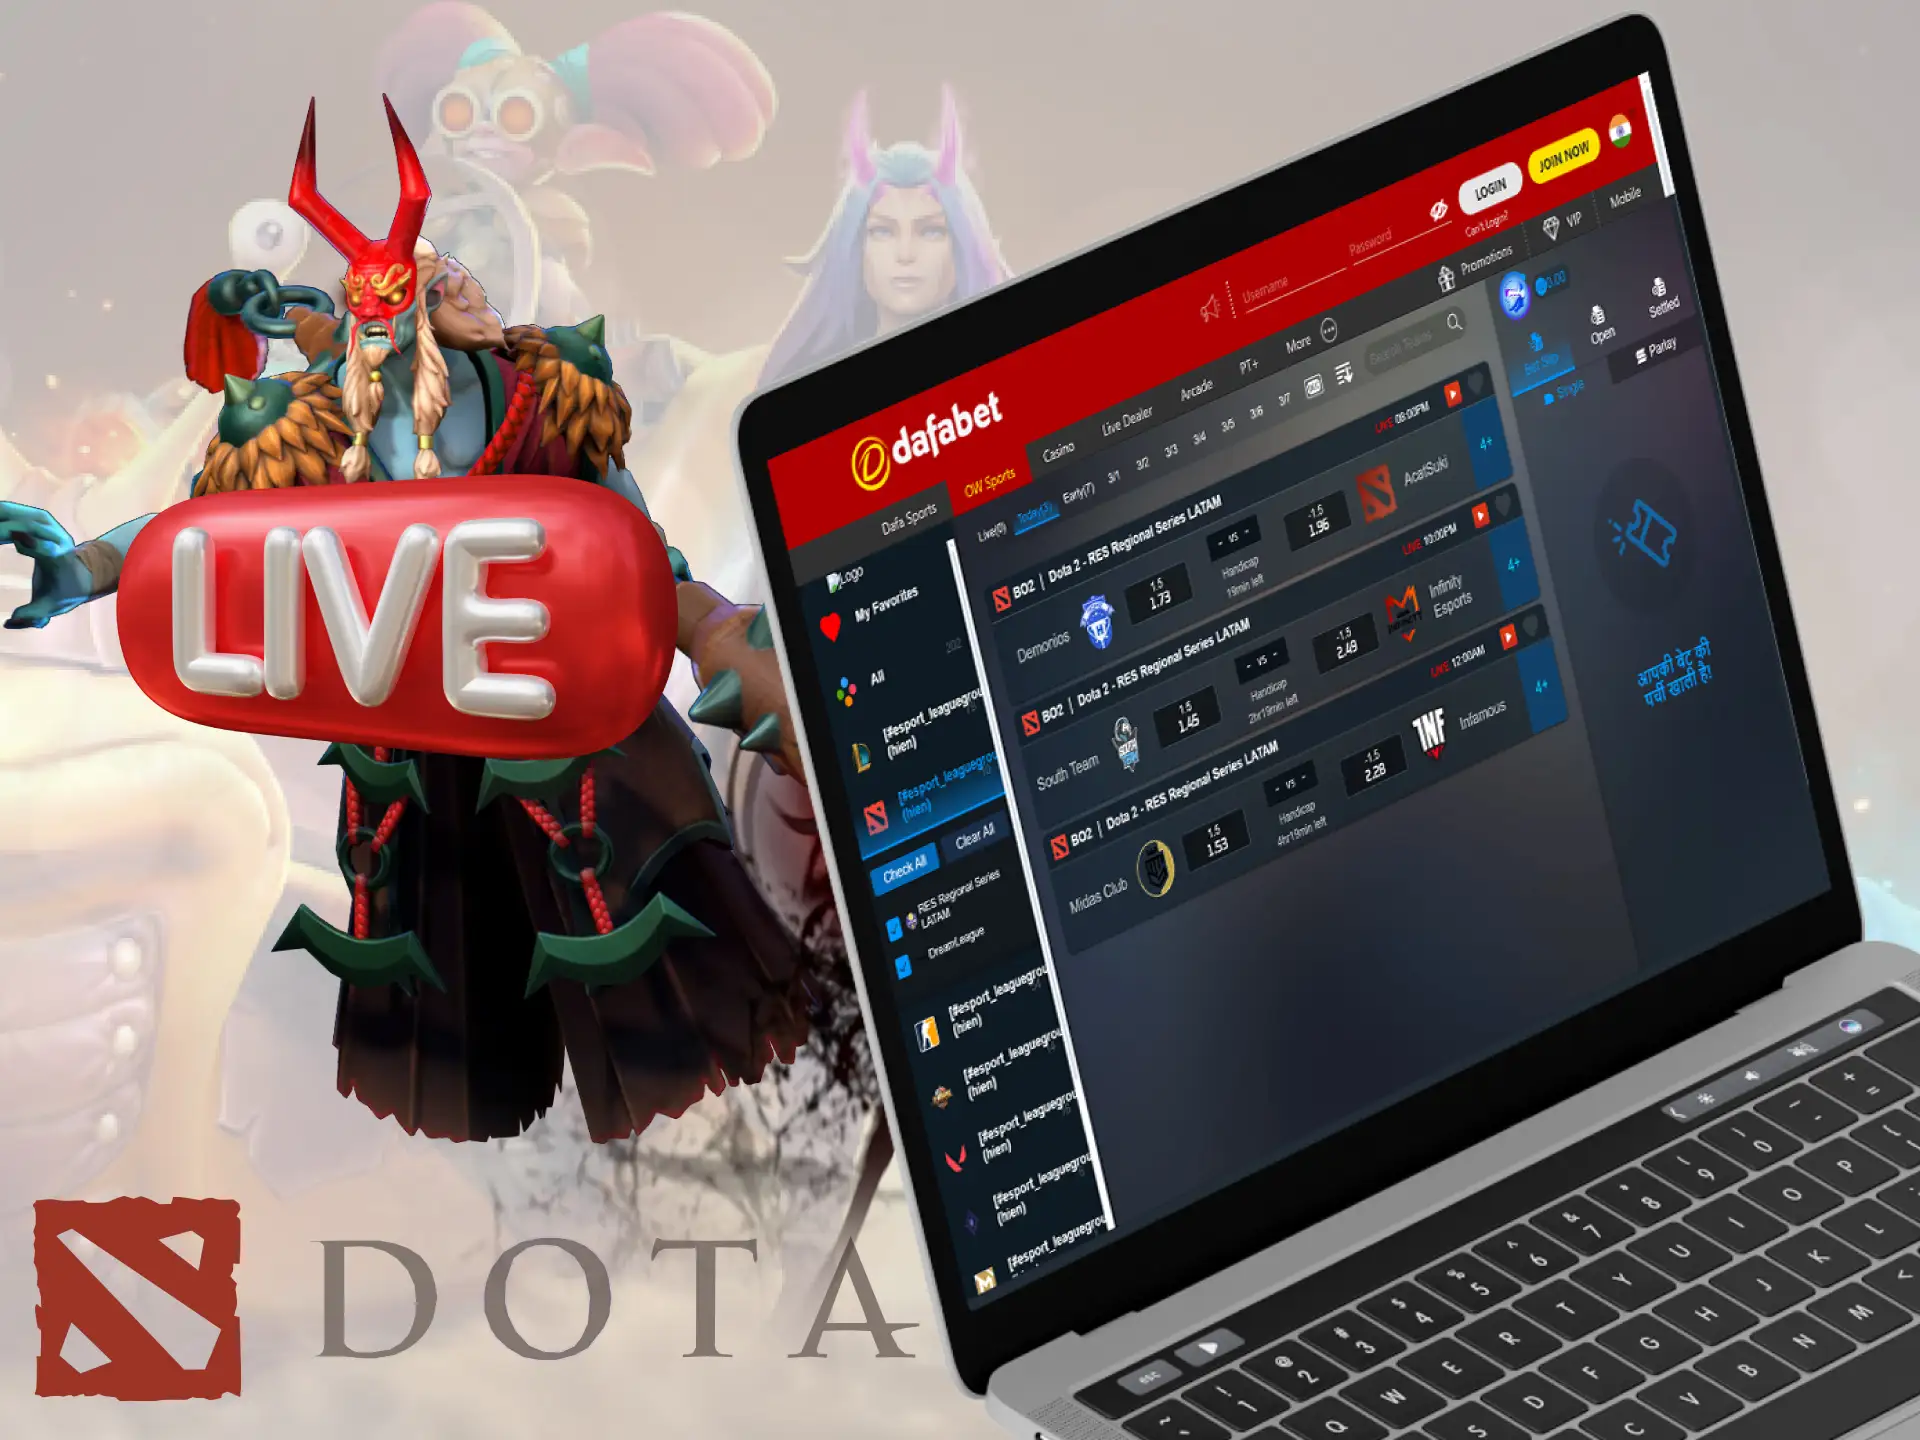 Place bets on Dota 2 events in live streaming.